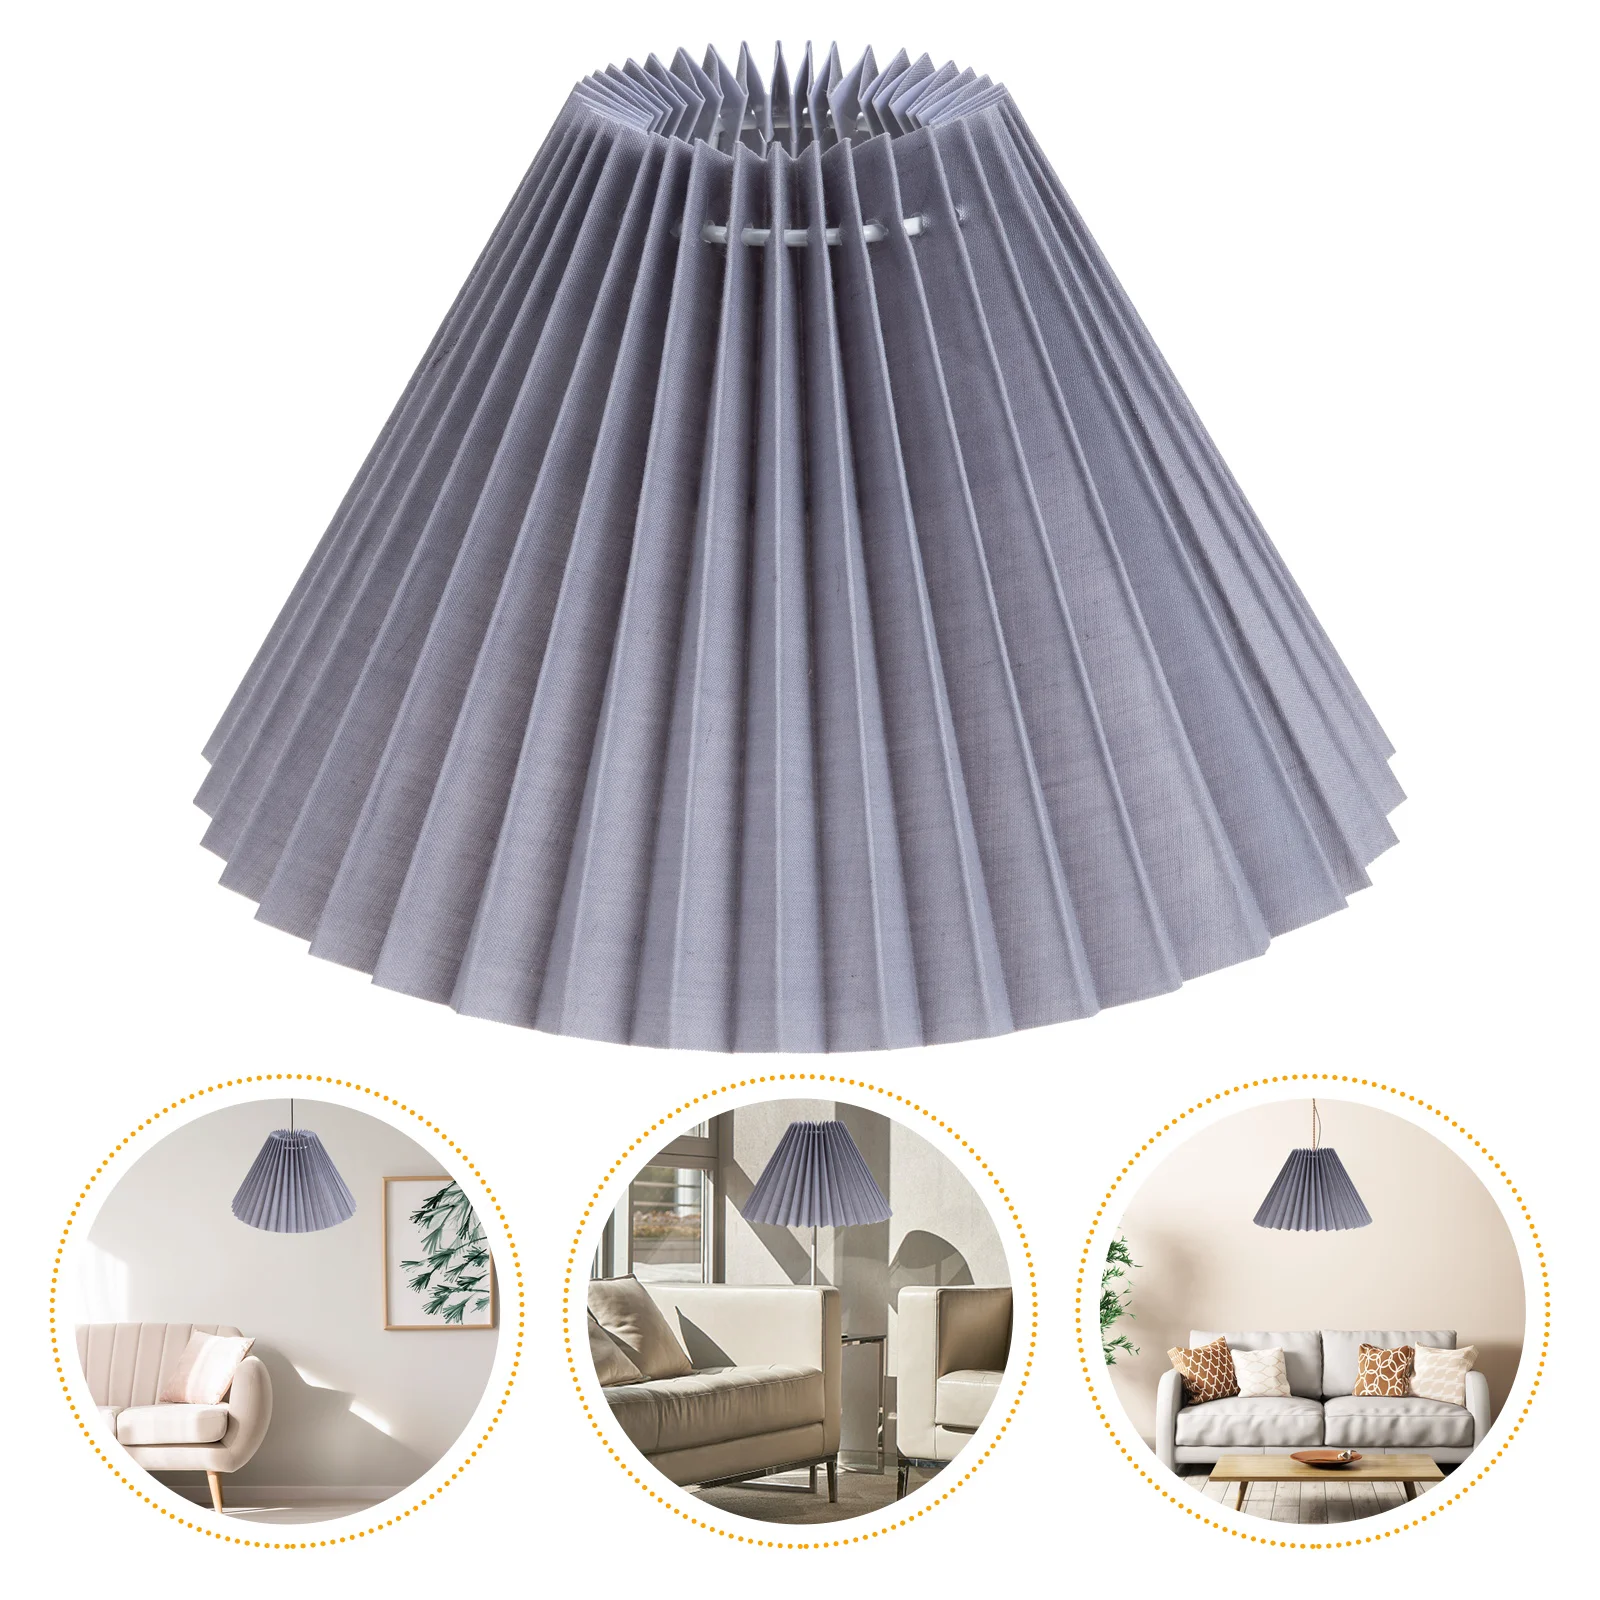 

Pleated Lampshade Tabletop Desk Household Small Shades Vintage Lampshades for Light Cloth Drum